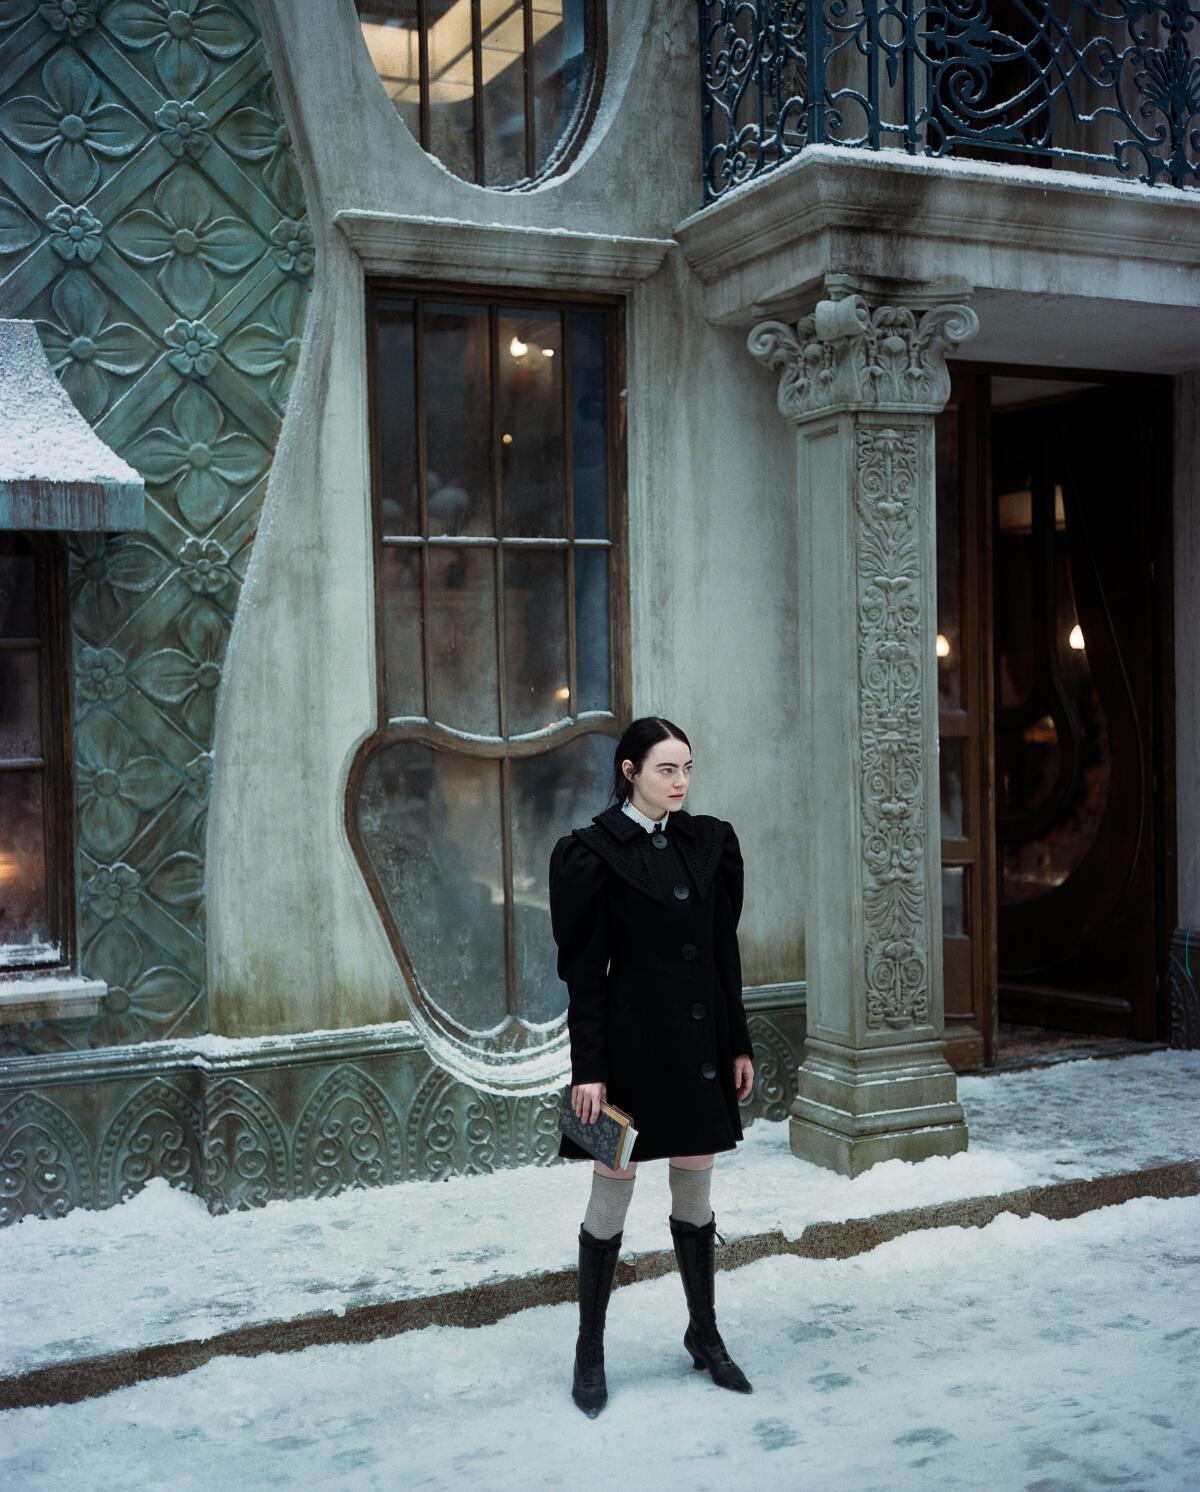 Emma Stone stands in the snow wearing a matching black skirt and jacket near the film's end.